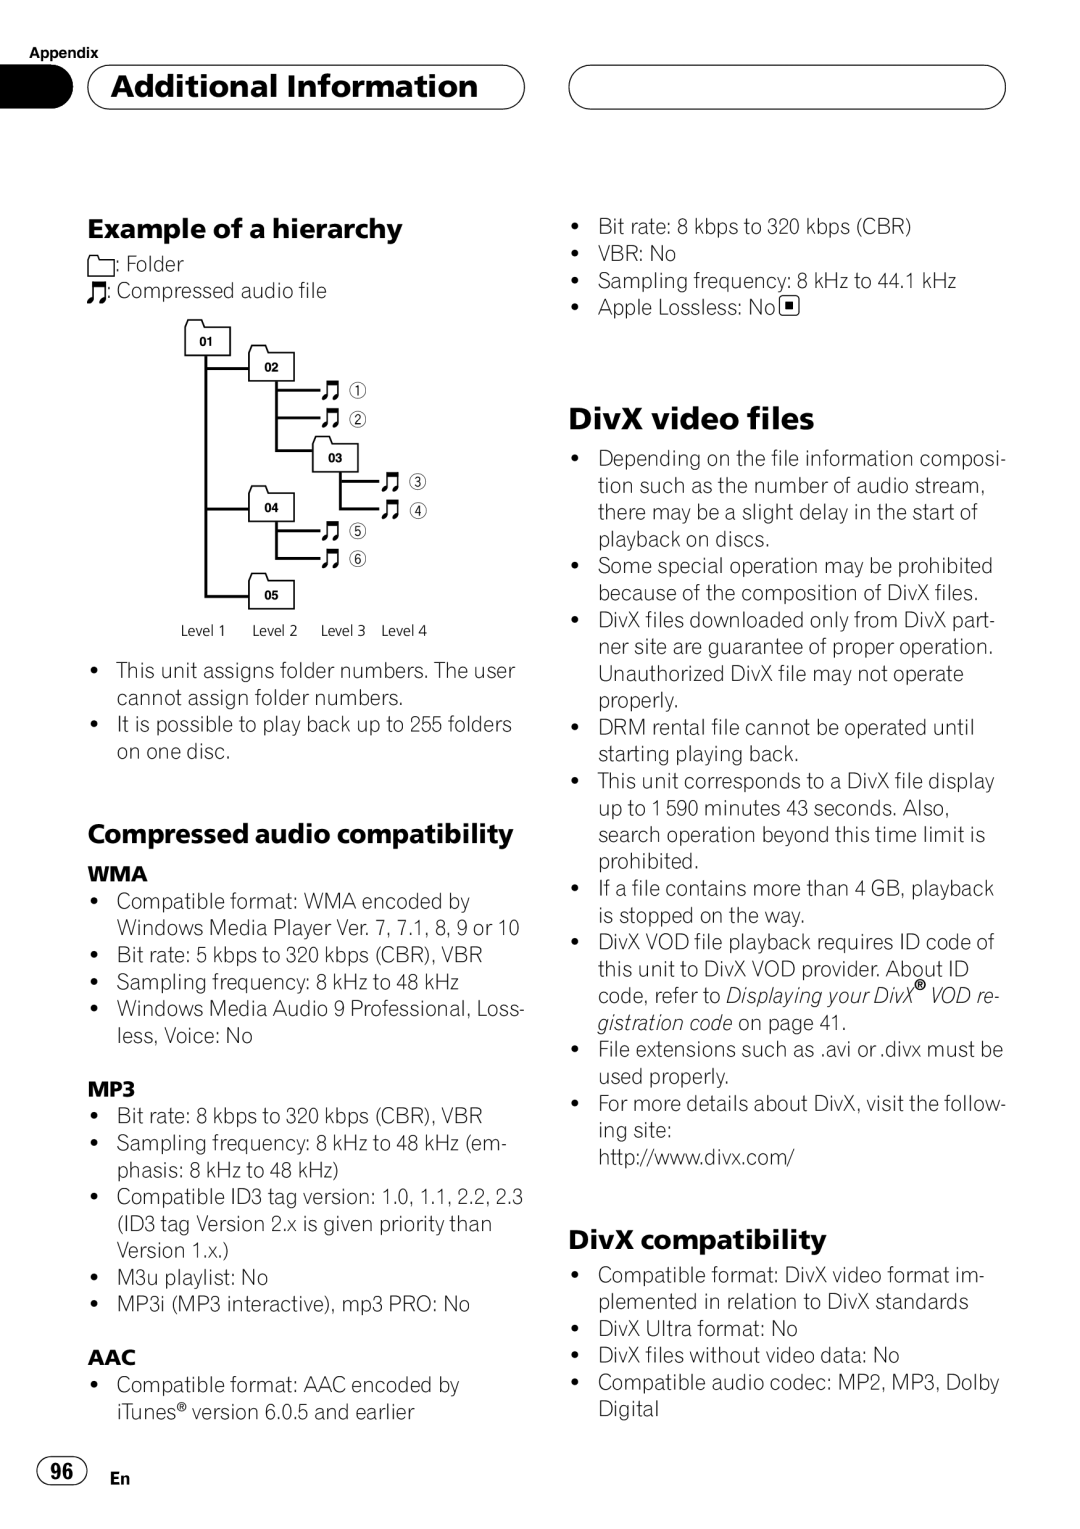 Pioneer AVH-P5900D DivX video files, Example of a hierarchy, Compressed audio compatibility, DivX compatibility 